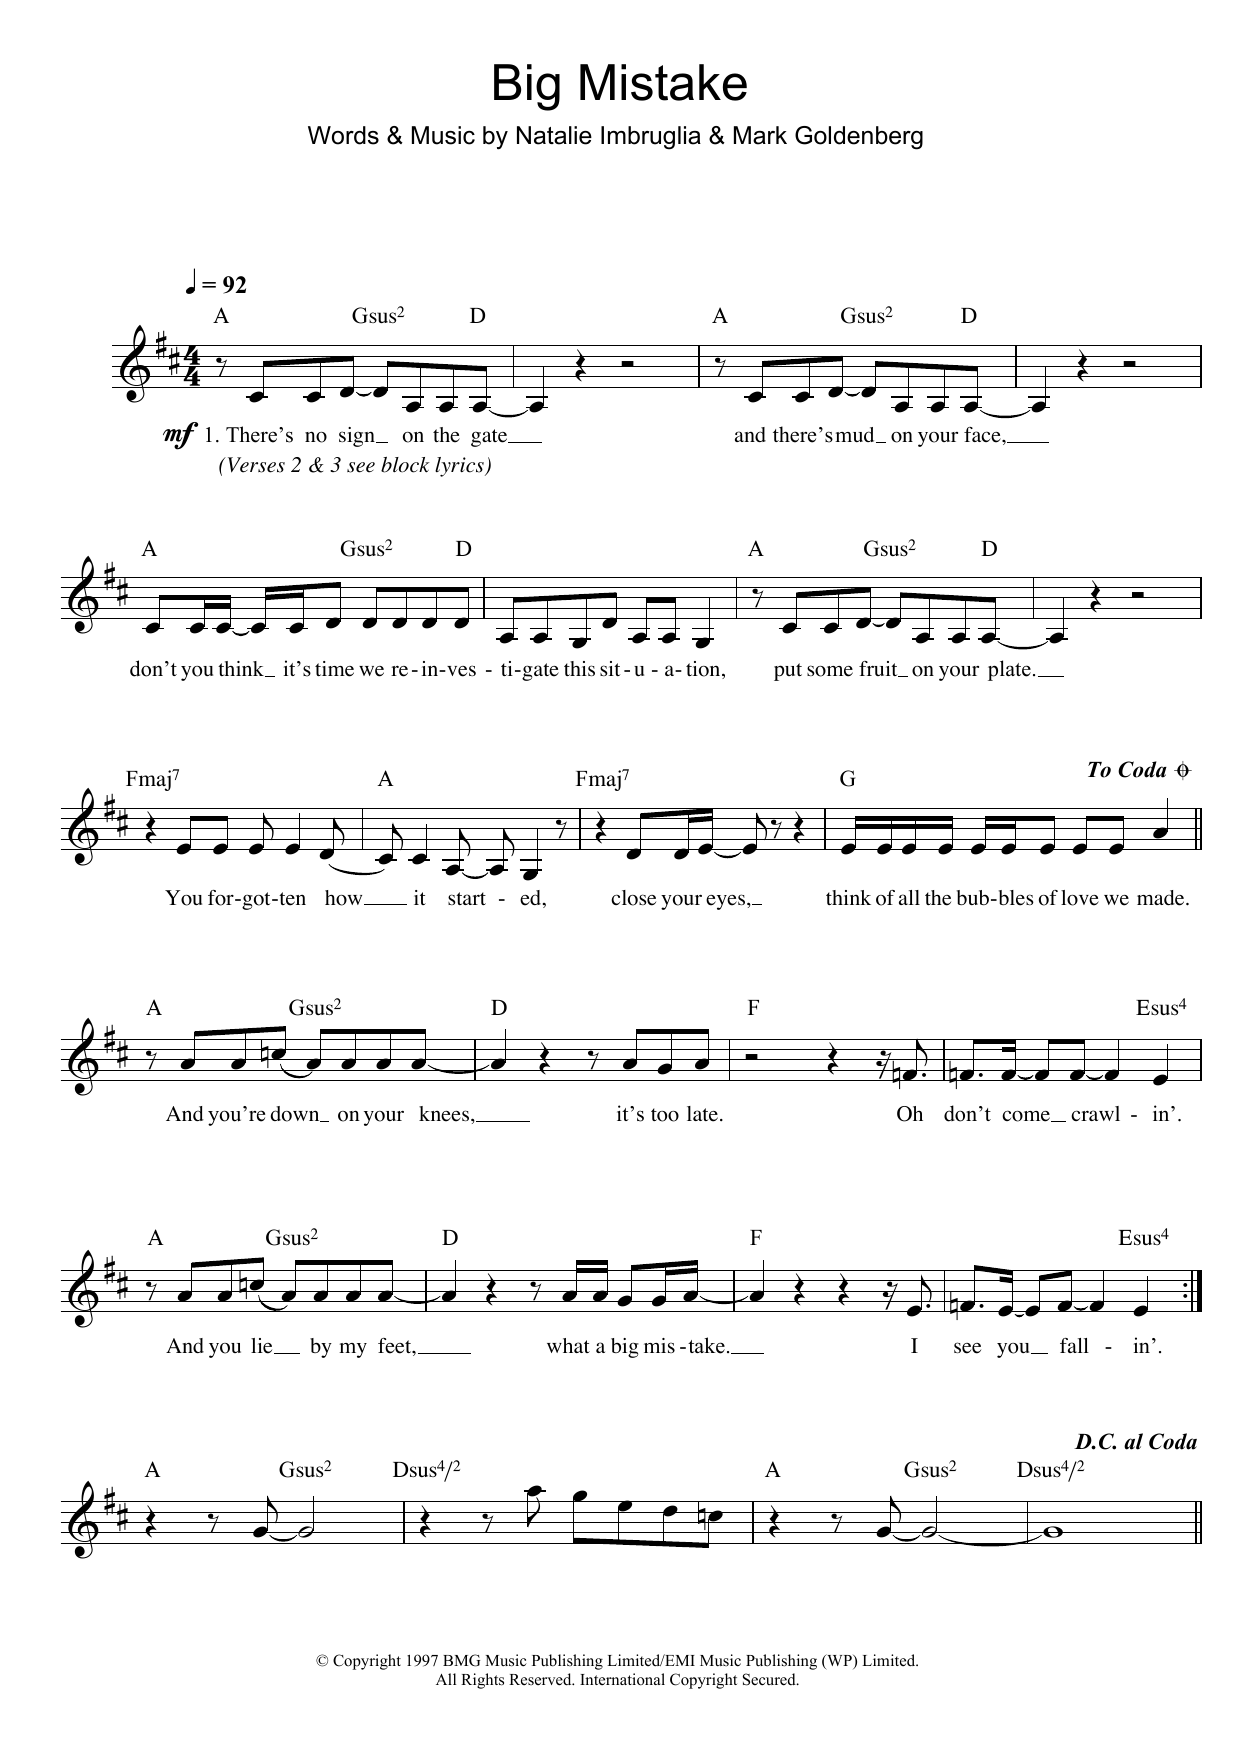 Natalie Imbruglia Big Mistake sheet music notes and chords. Download Printable PDF.